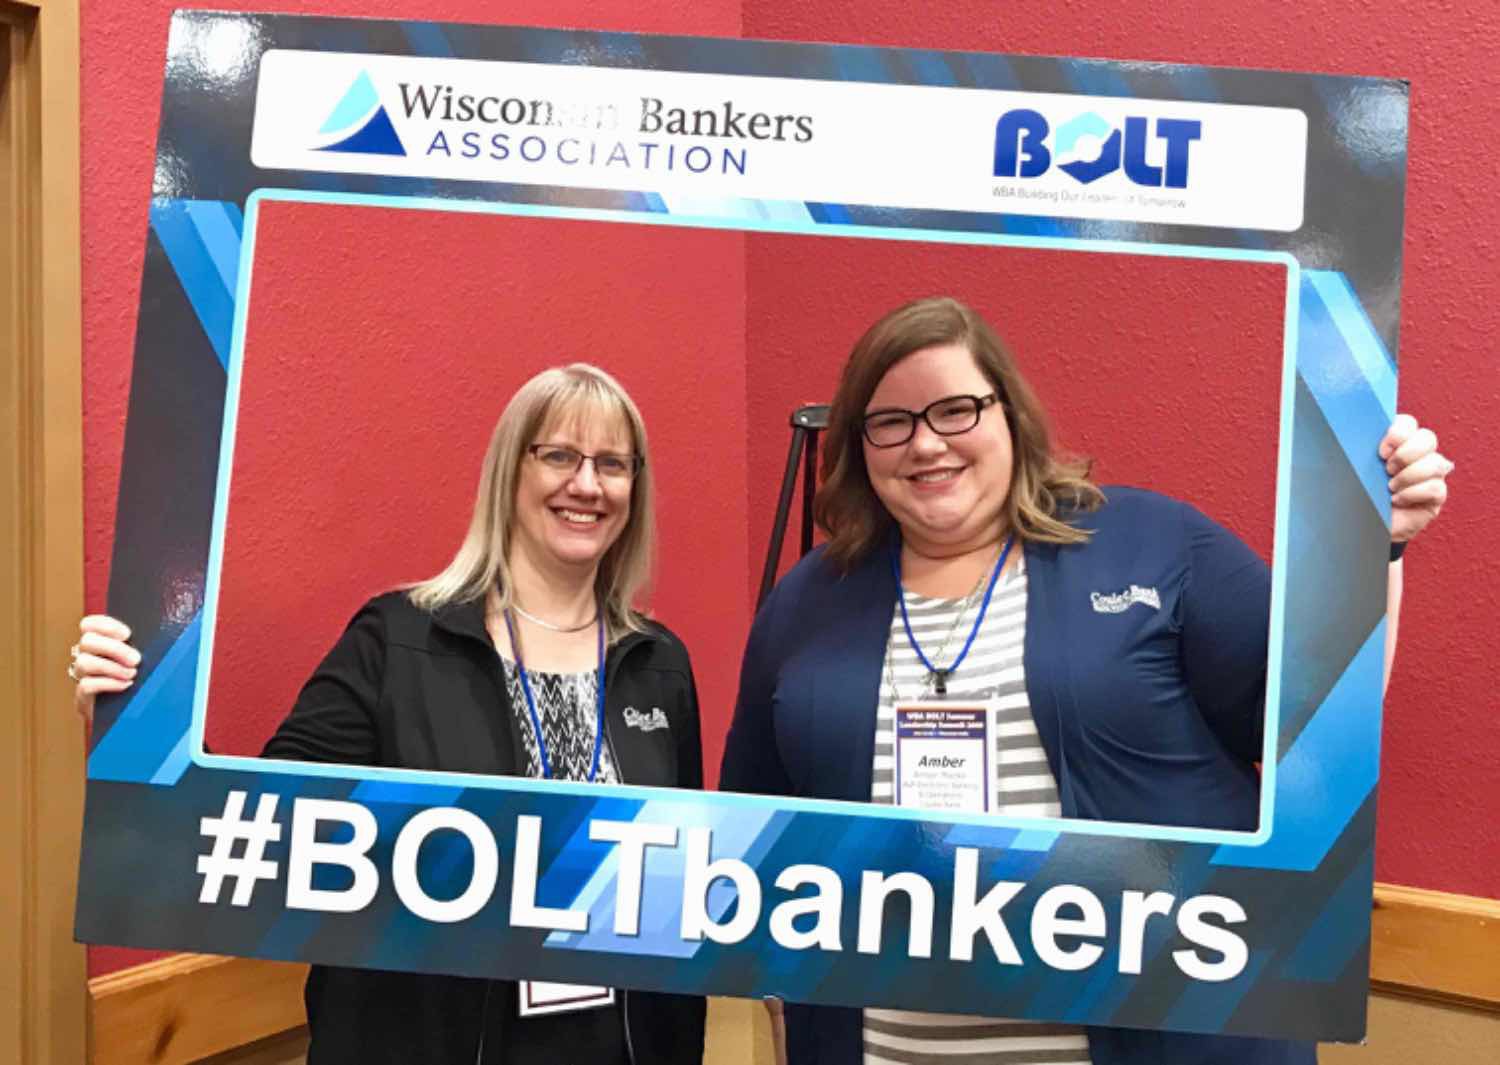 #BoltBankers